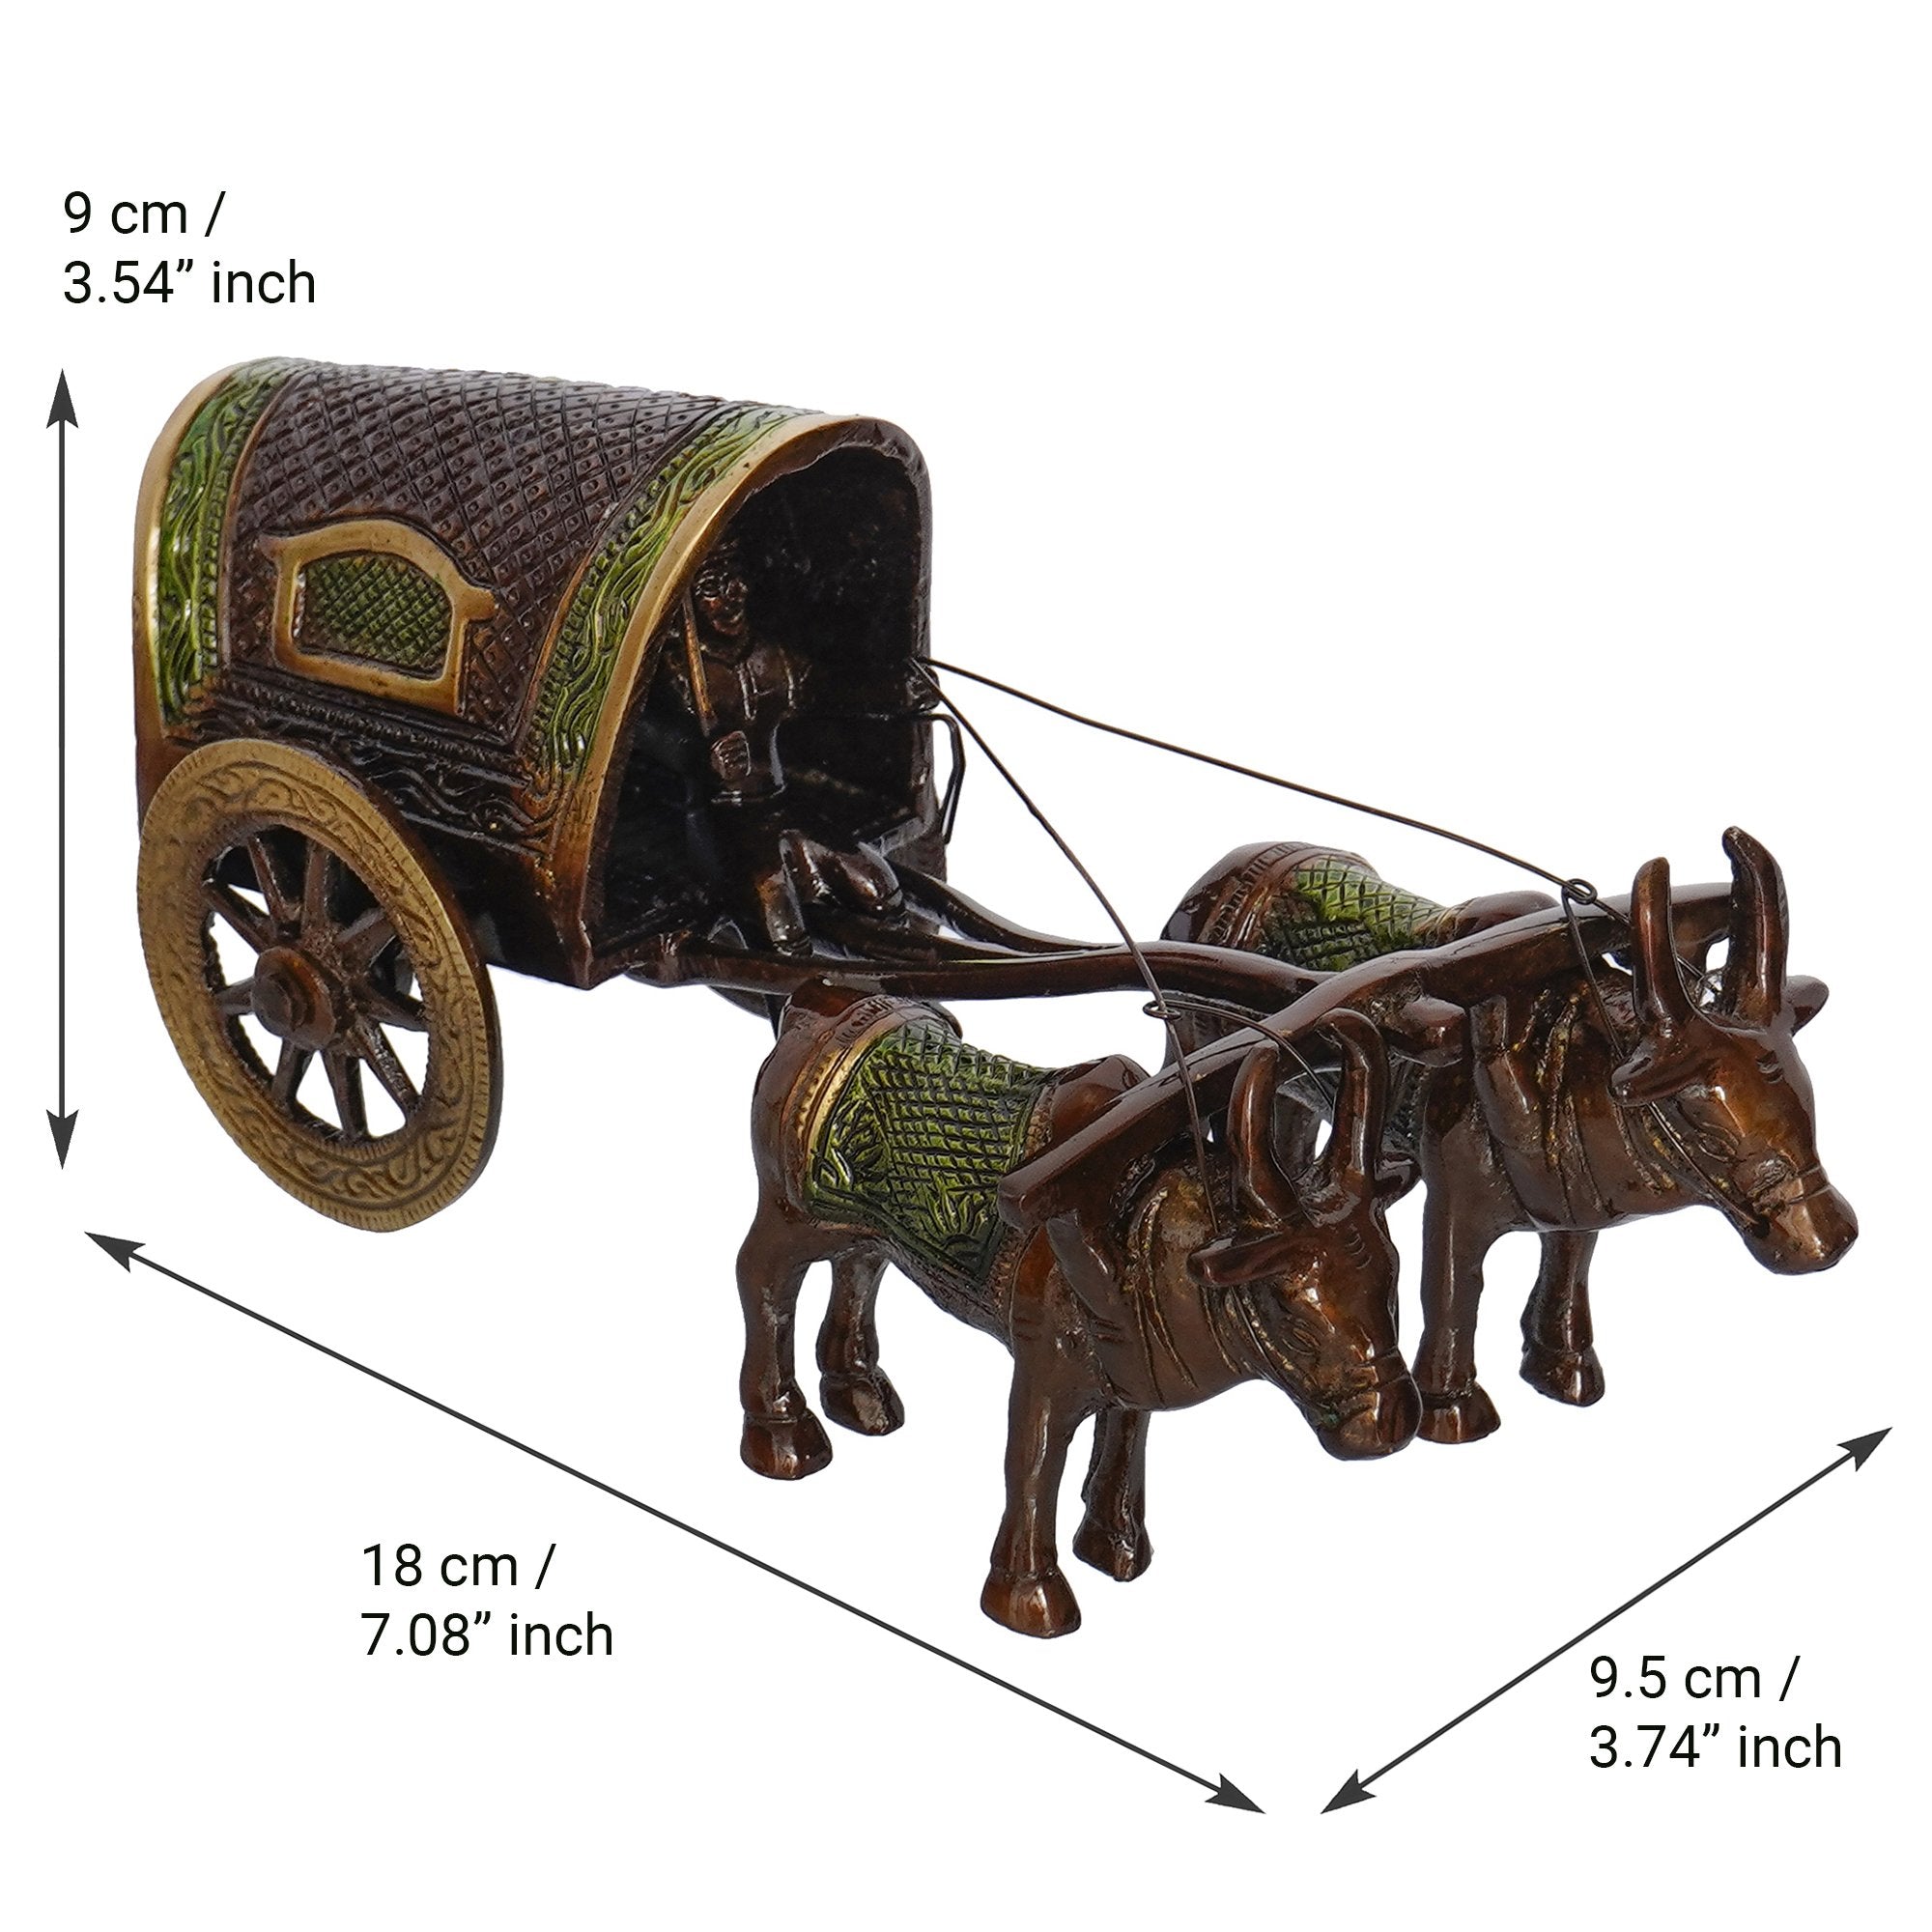 Designer Peacock Rakhi with Brass Brown and Green Antique Finish Closed Bullock Cart  and Roli Chawal Pack, Best Wishes Greeting Card 3